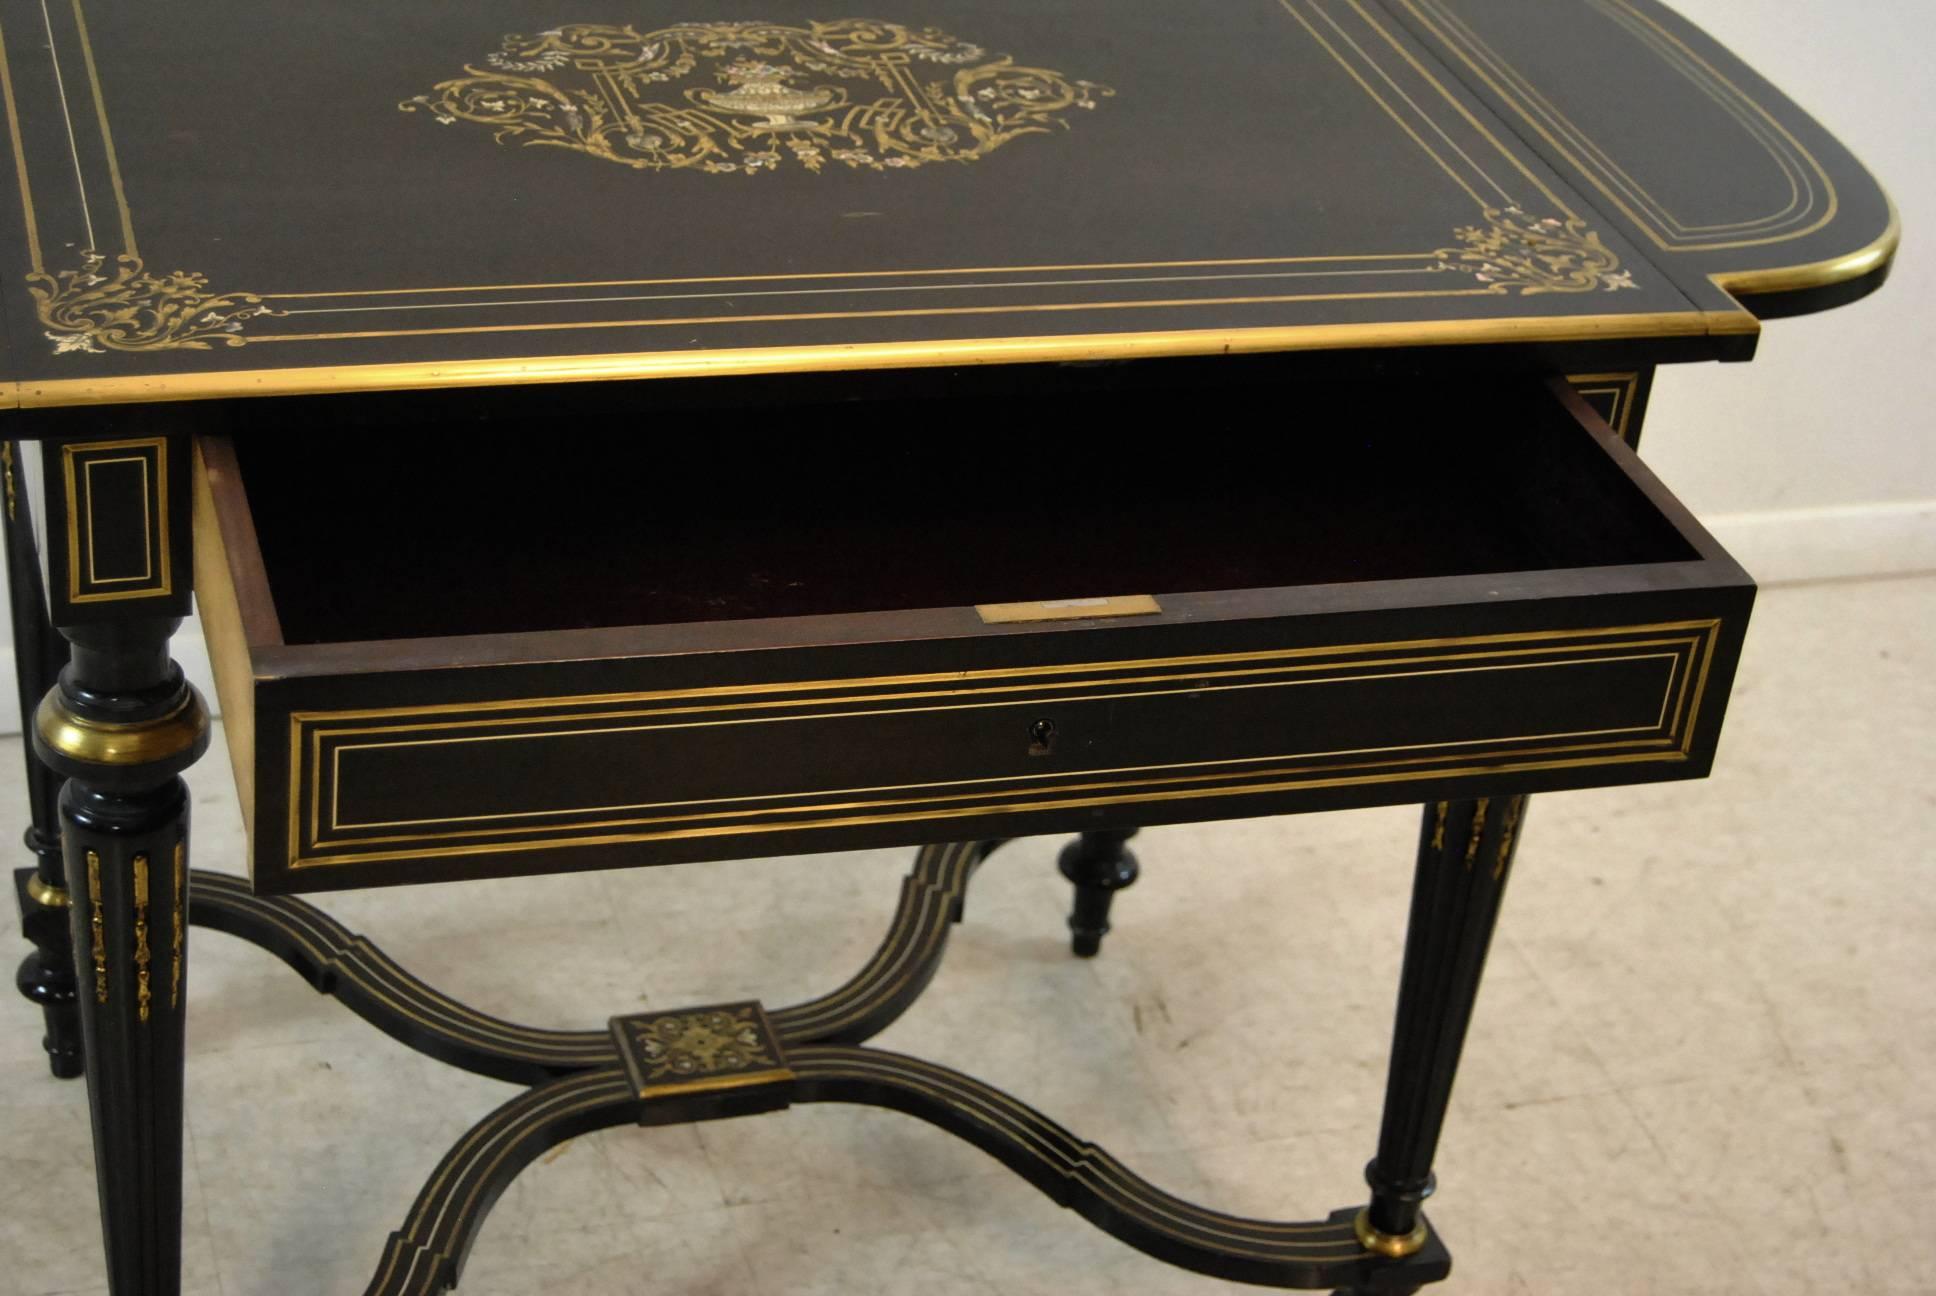 19th Century Ebonized Drop Leaf Table with Inlaid Mother-of-Pearl and Brass For Sale 5